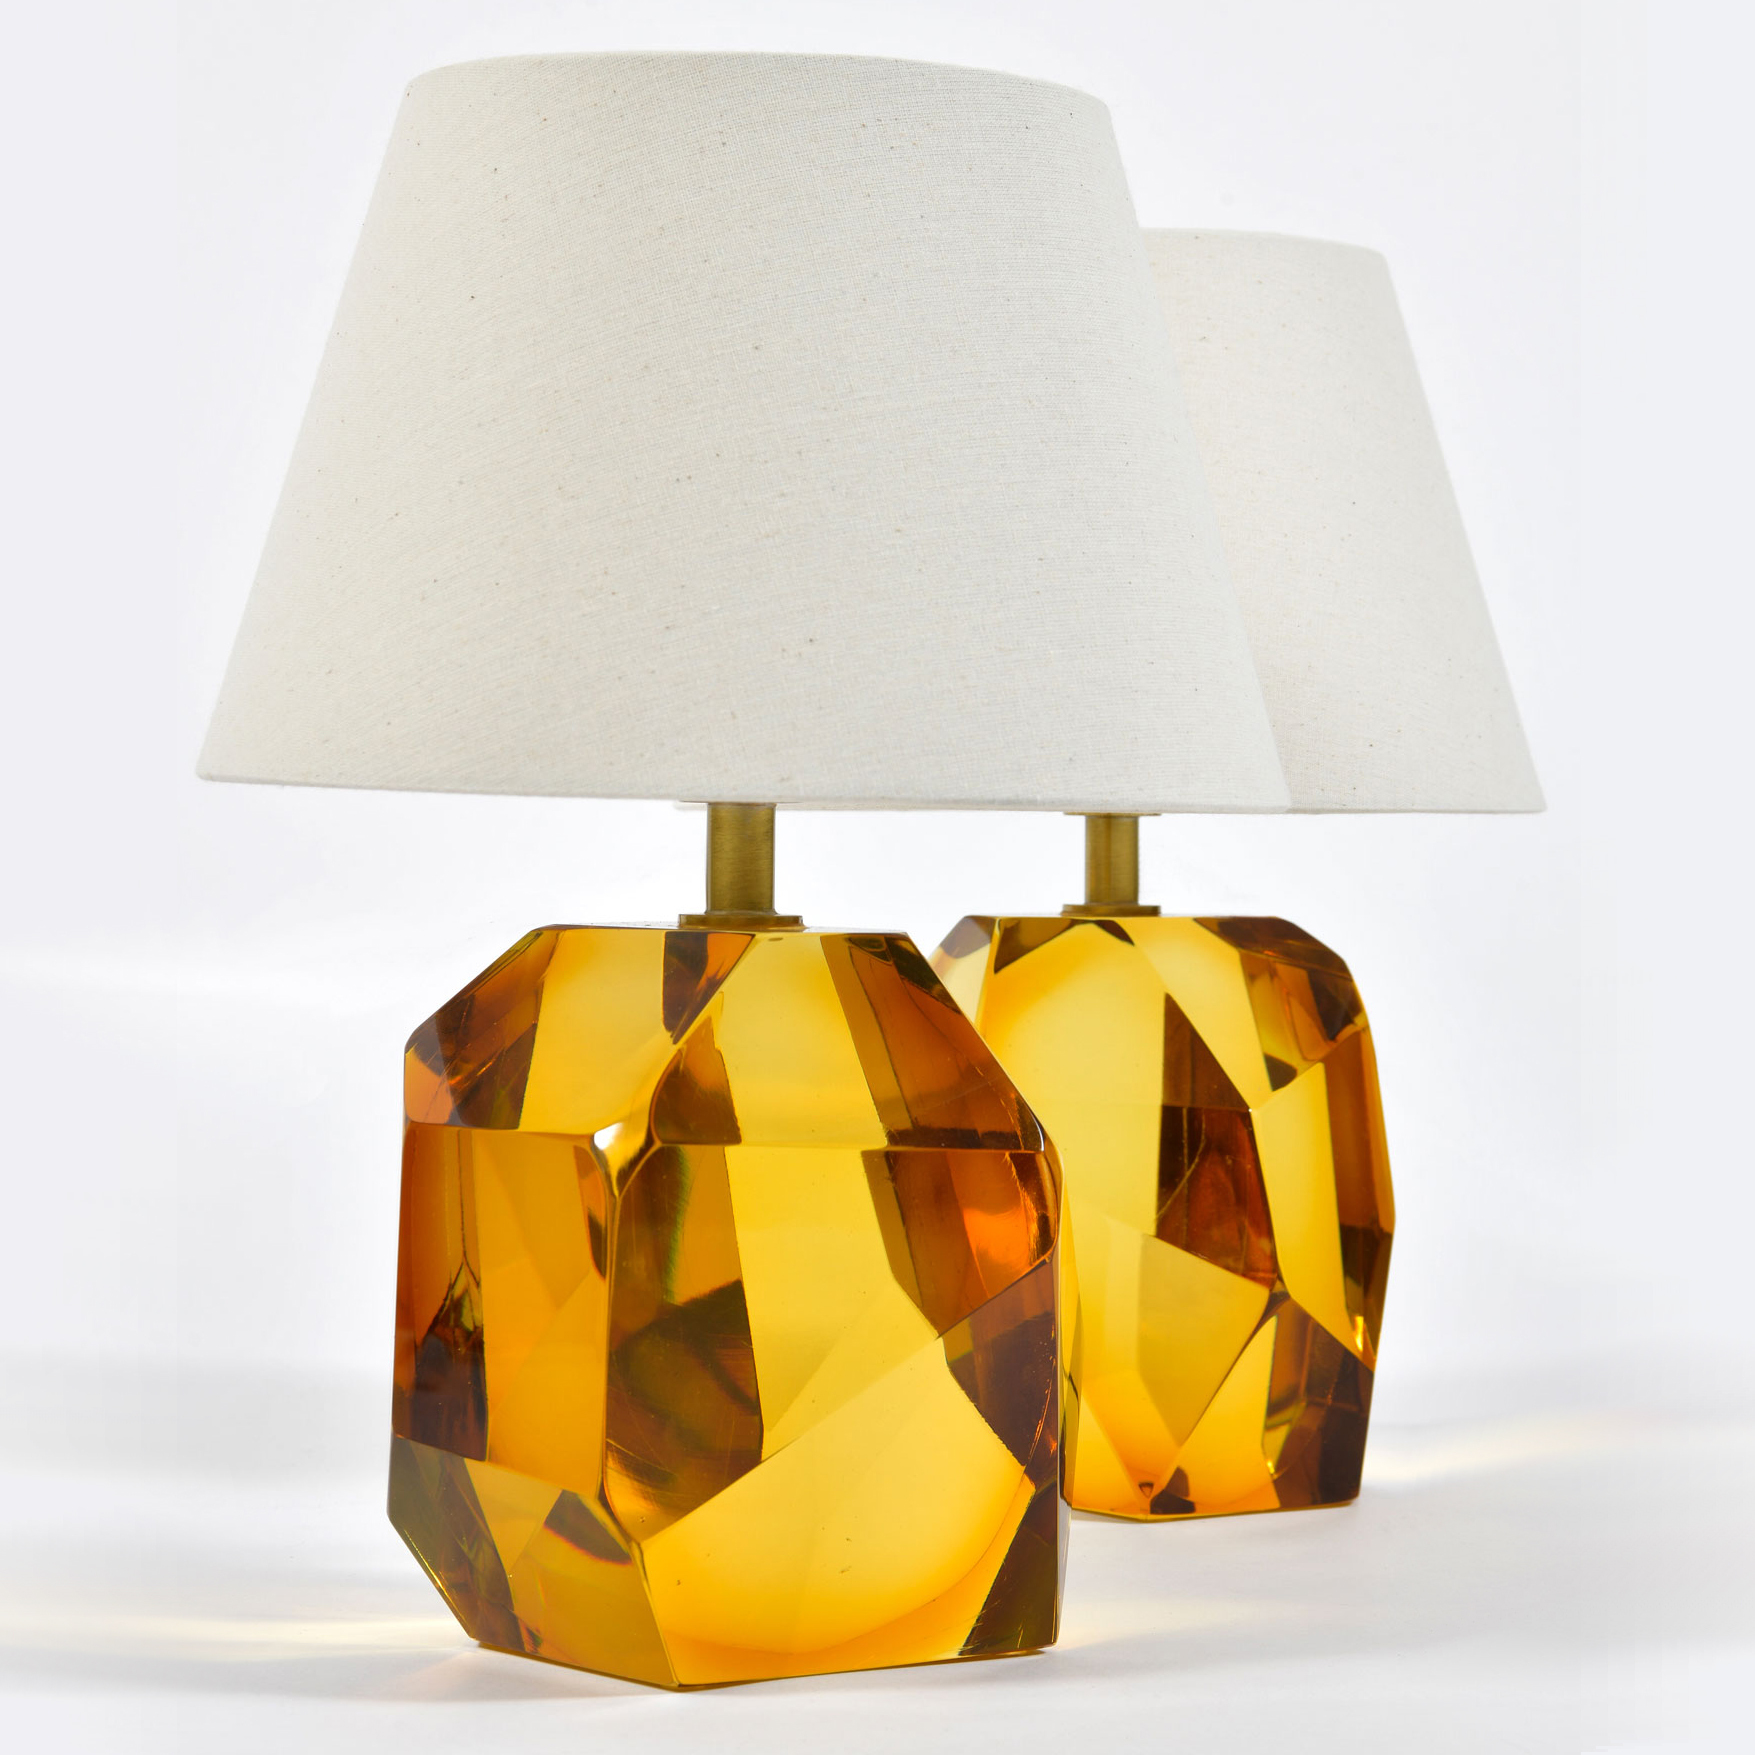 The image for Pair Of Amber Rock Lamps 03